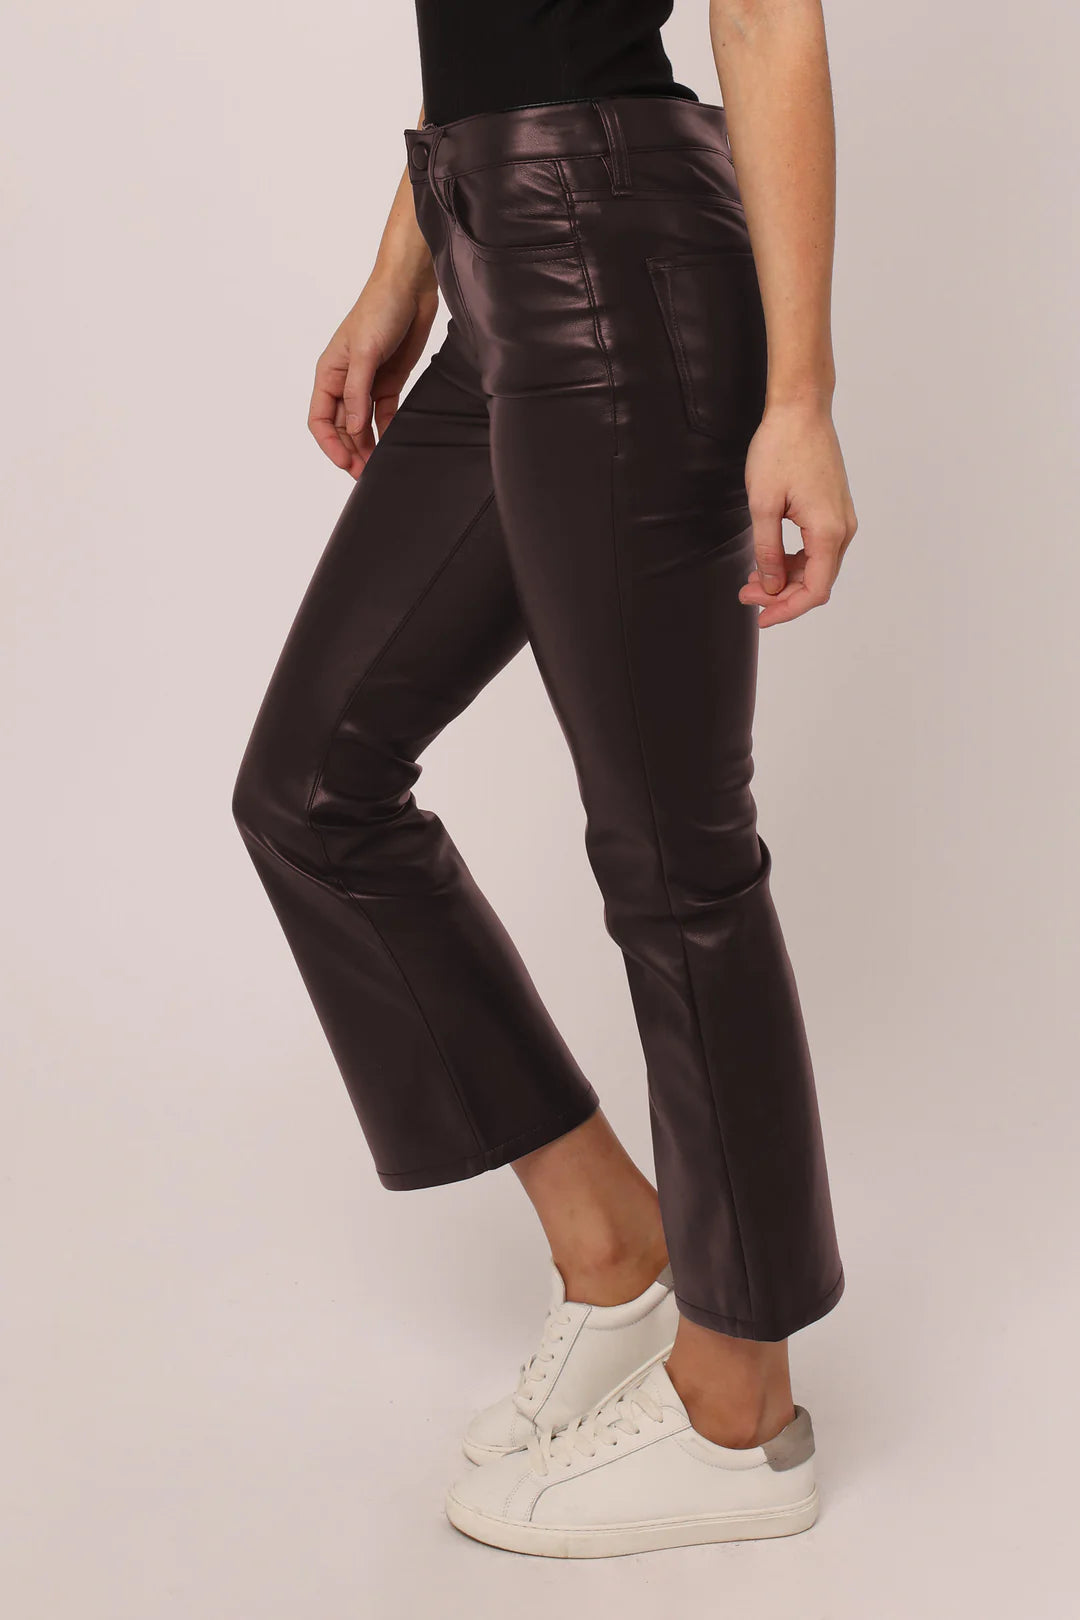 Jeanette Vegan Leather Cropped Pant - Coffee